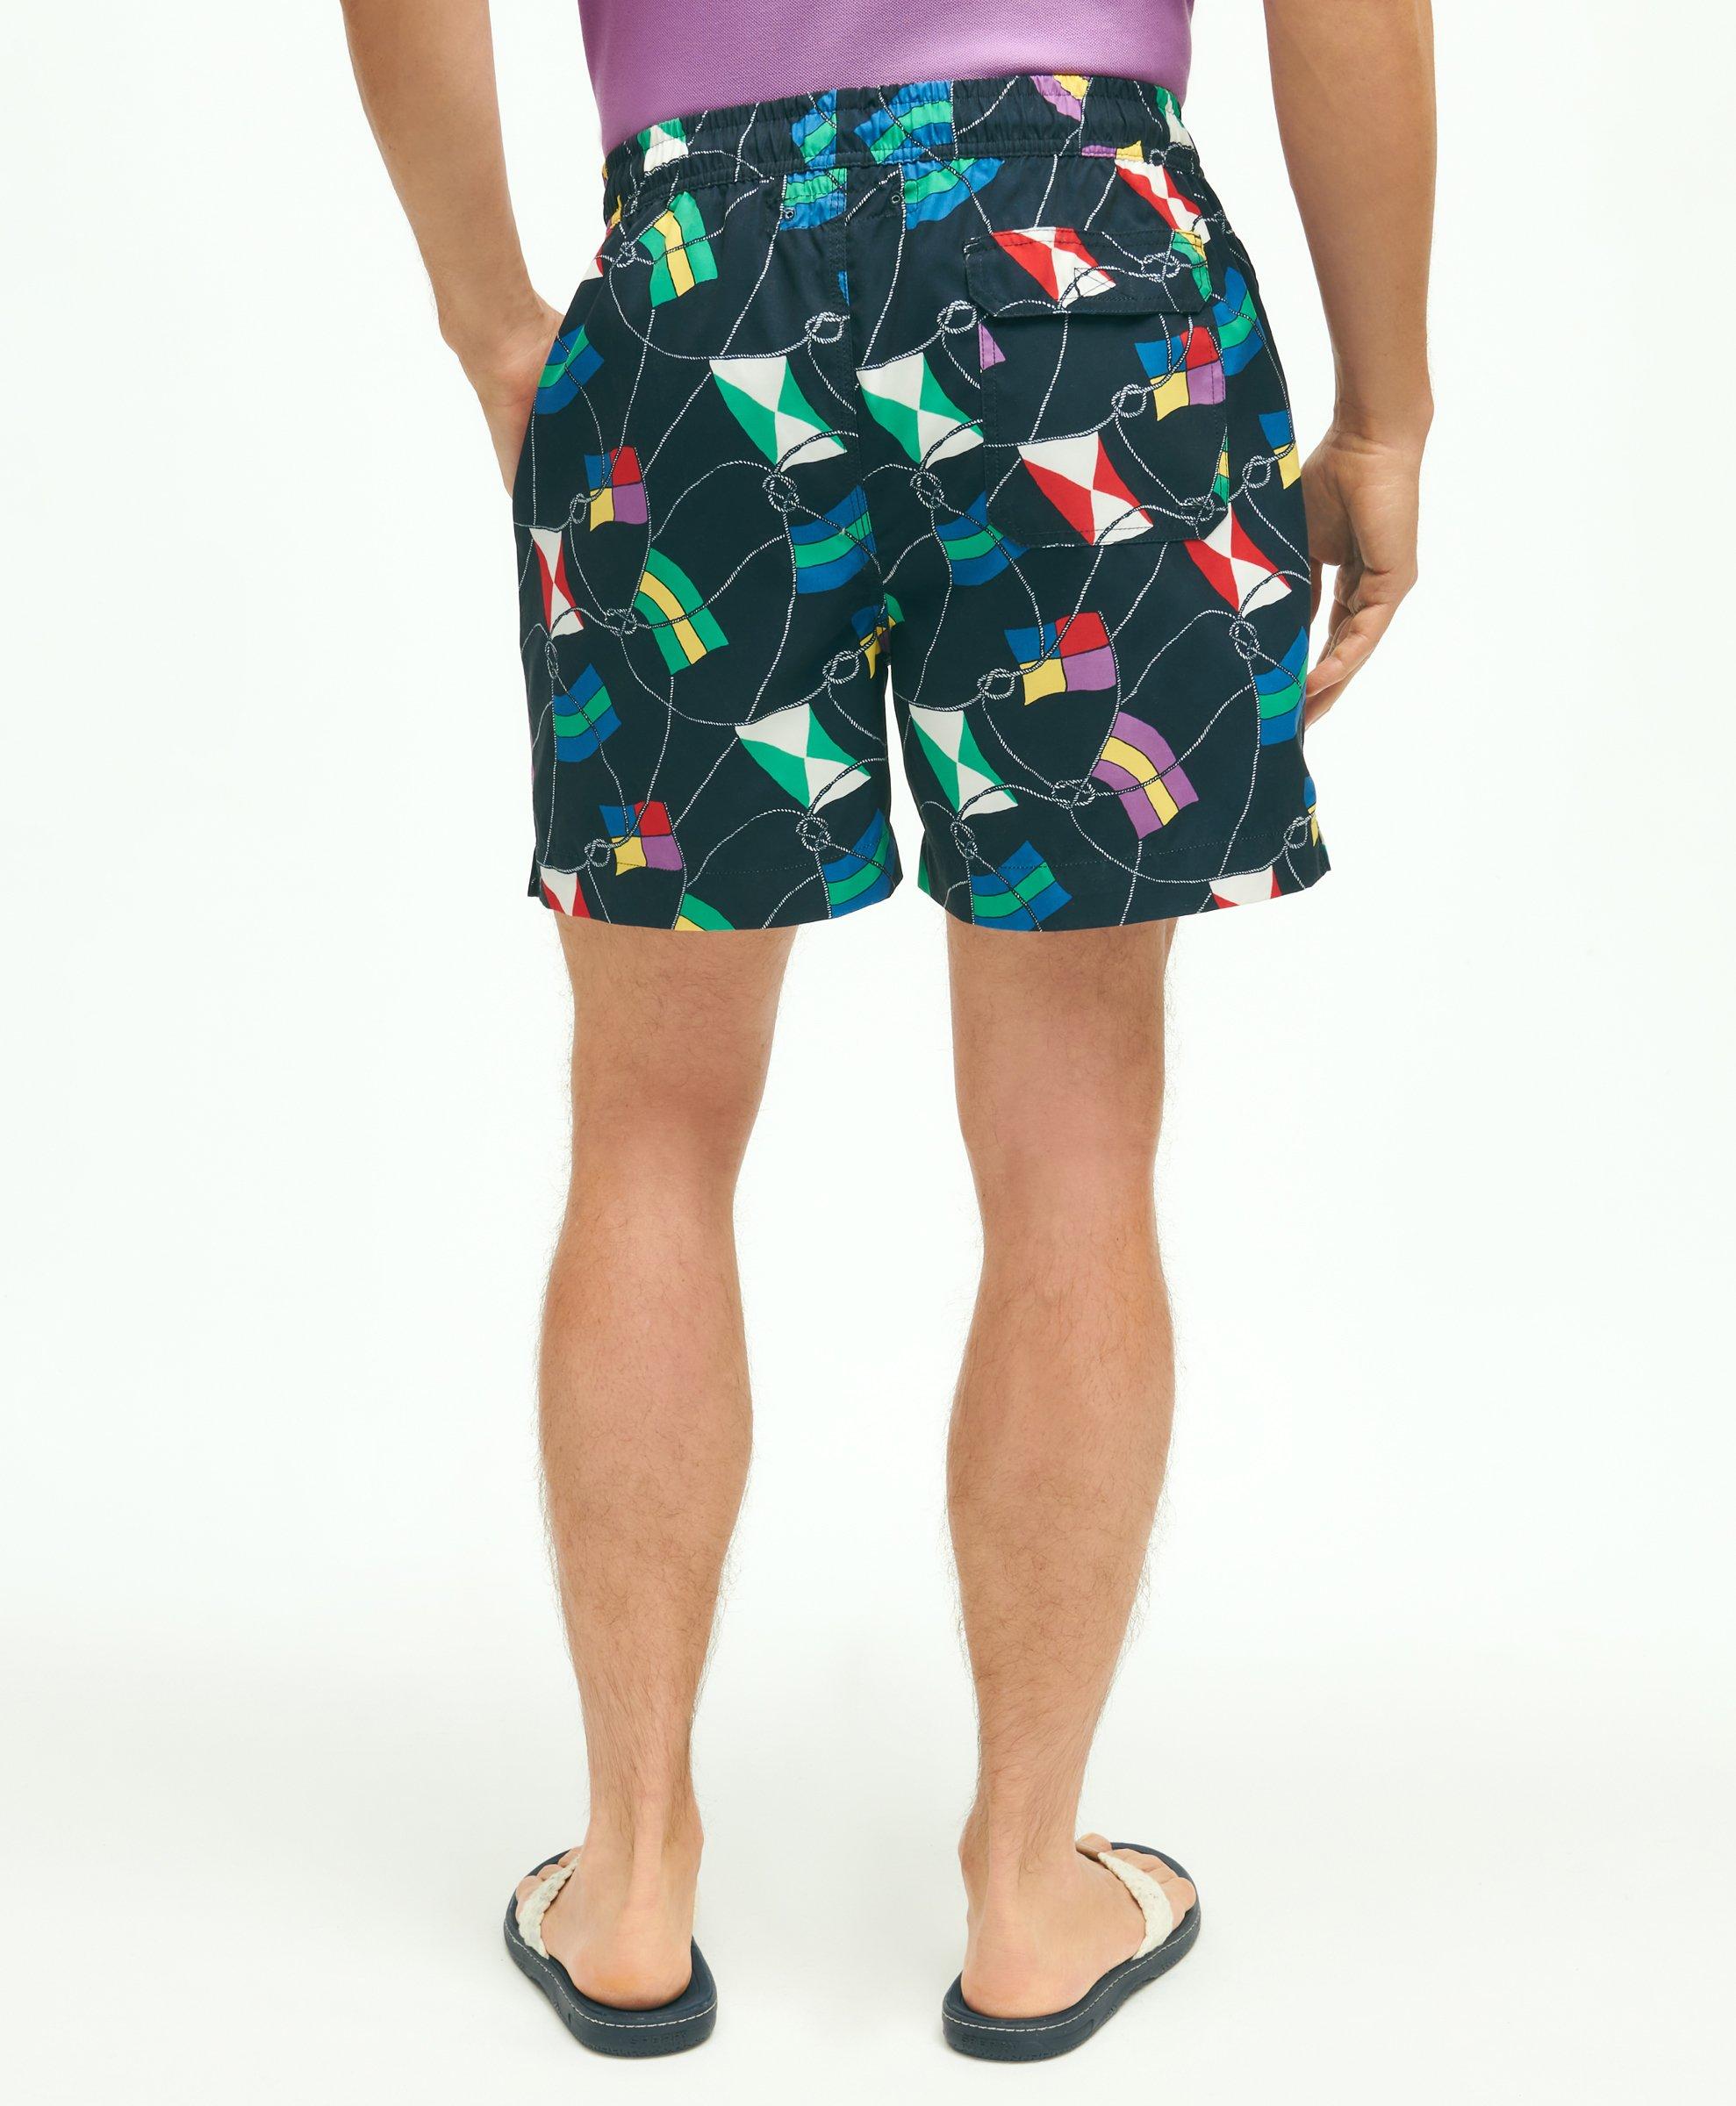 Fun Colorful Patterned Men's Flat Front Chino Shorts in Novelty Prints